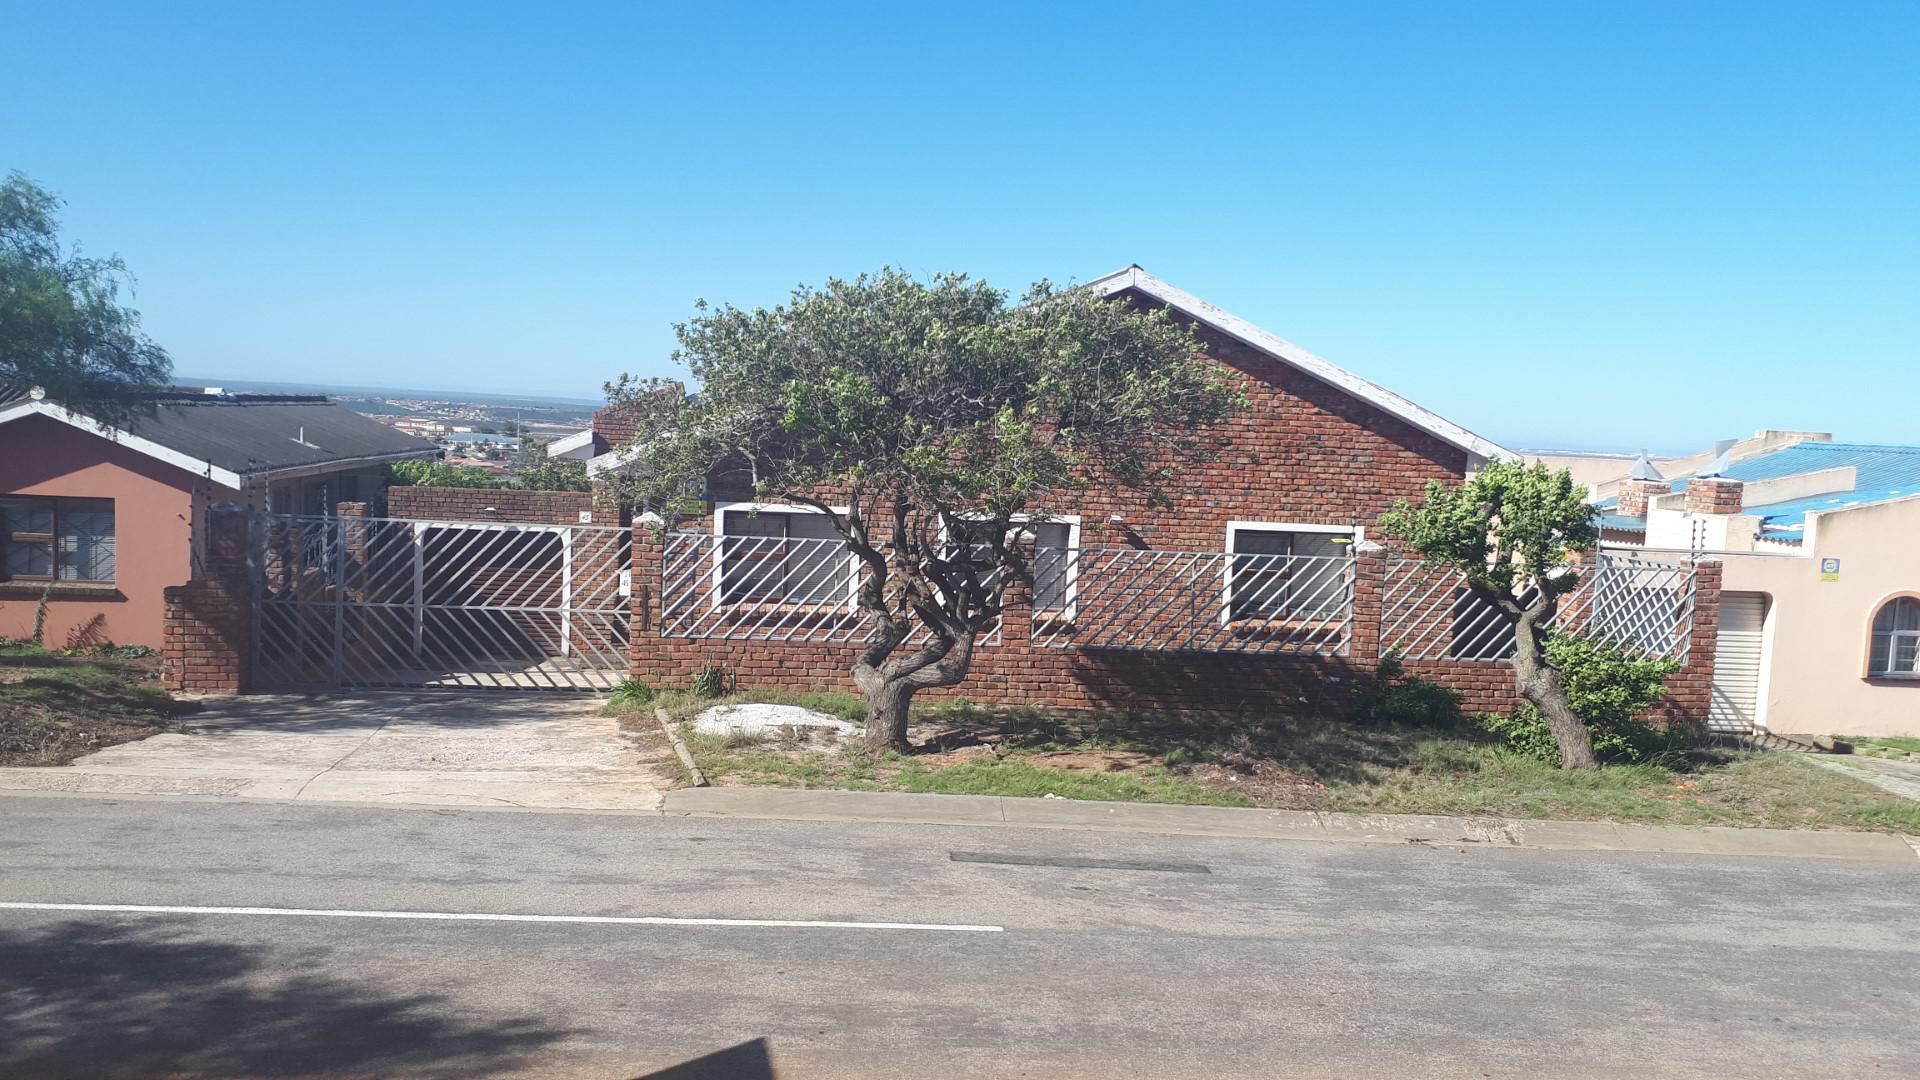 FNB Repossessed Eviction 5 Bedroom House for Sale in Cleary